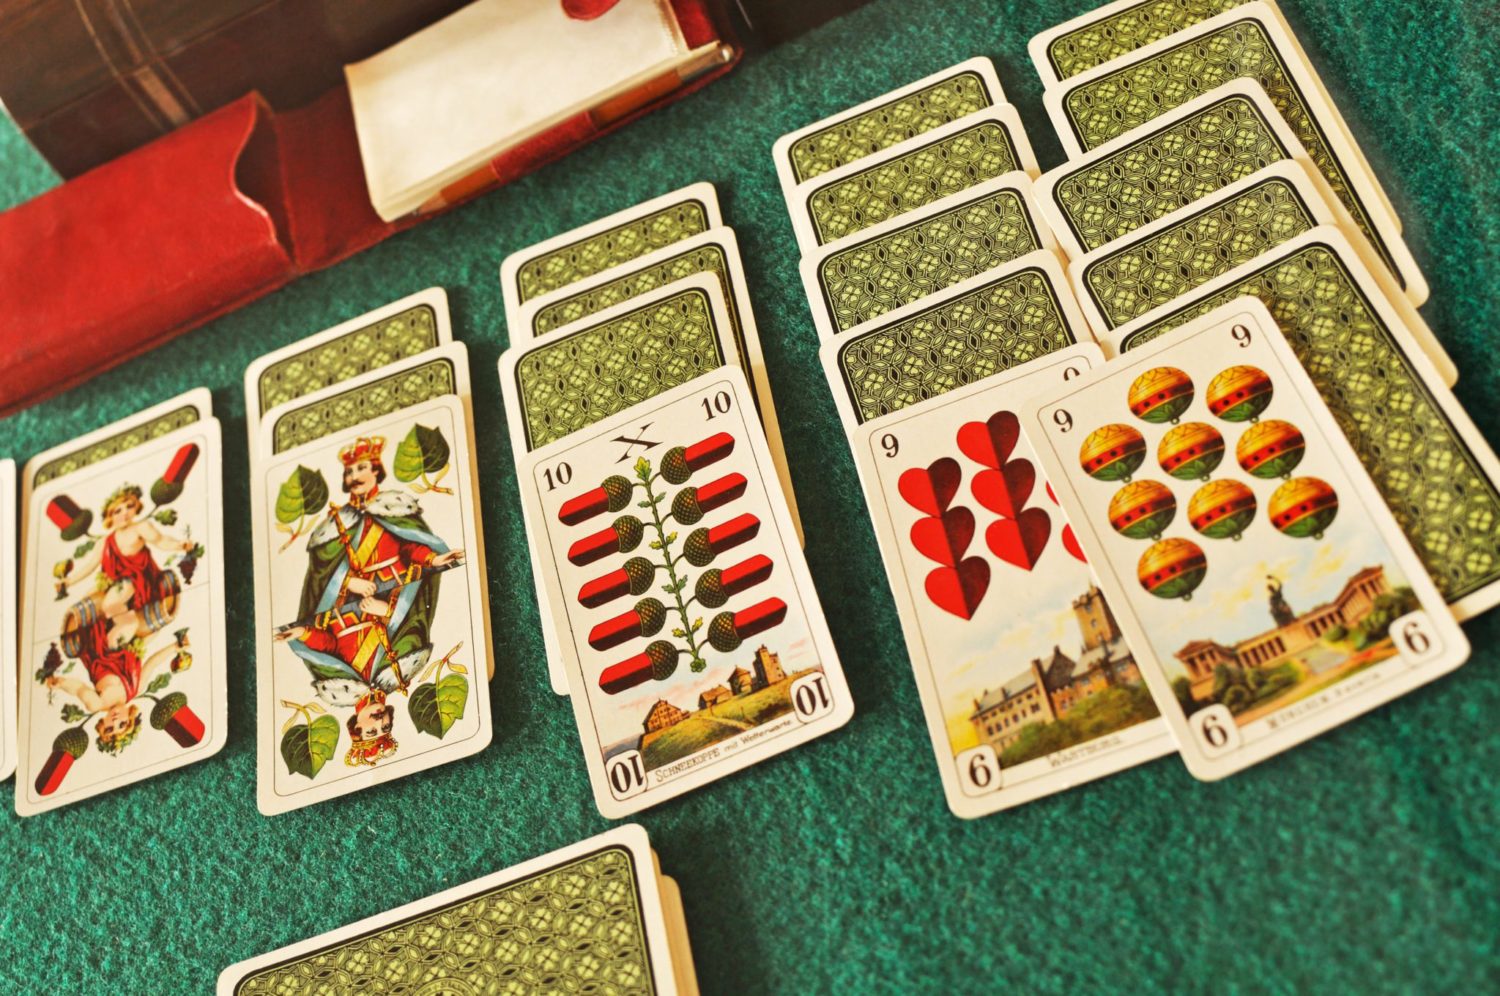 How to Play Solitaire: Rules and Strategies for Beginners